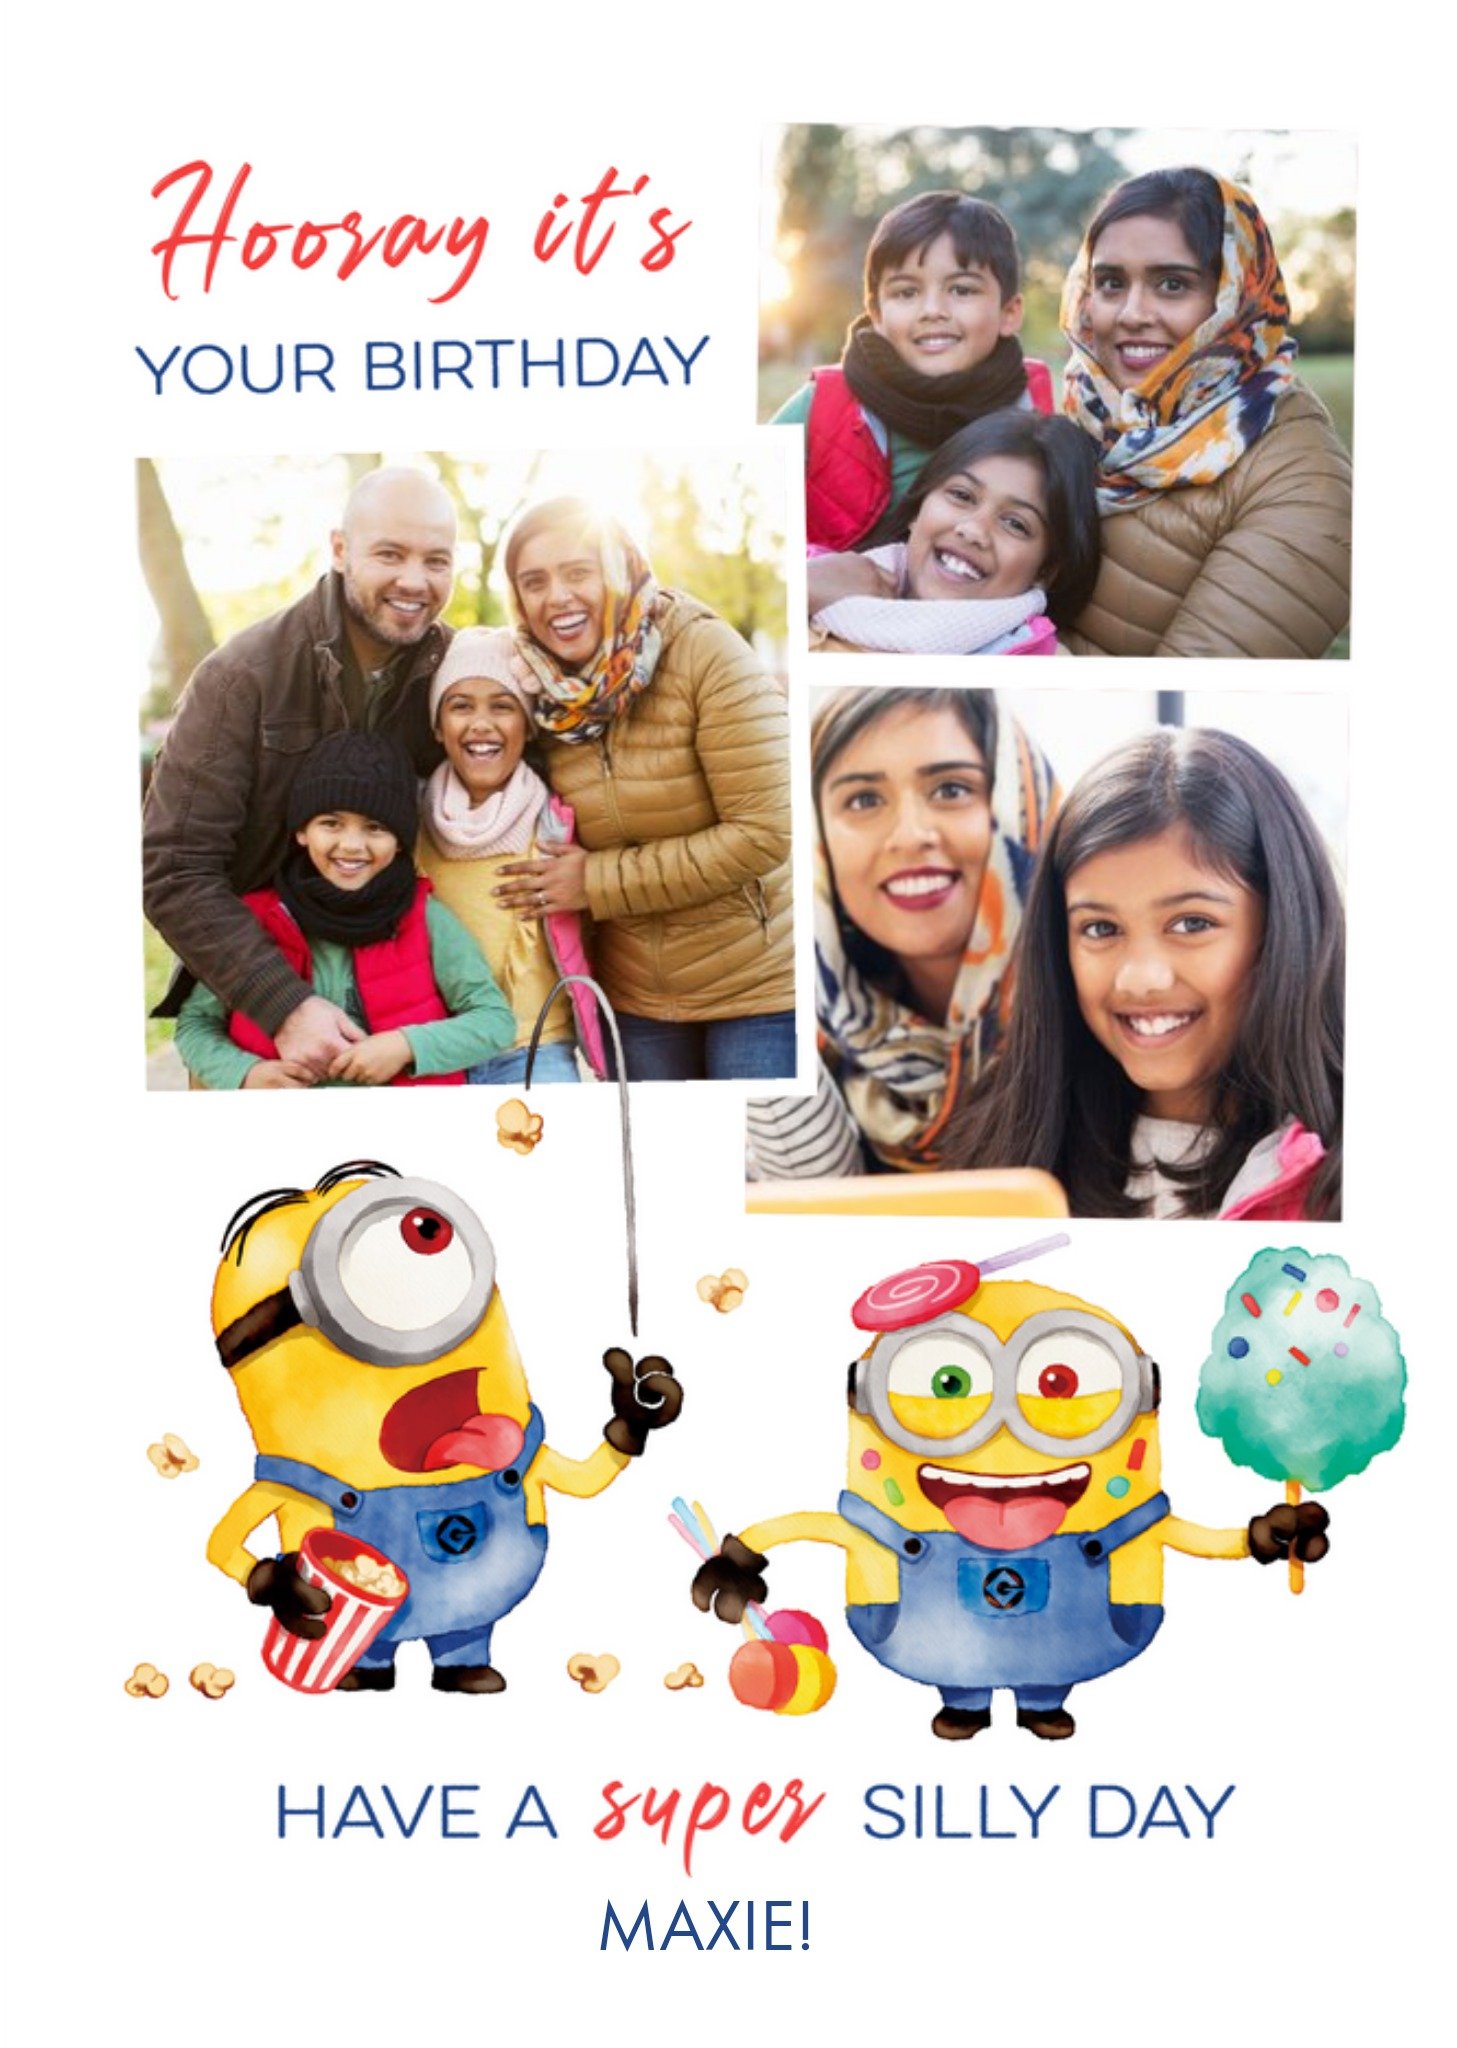 Despicable Me Minions Have A Super Silly Day Photo Upload Birthday Card, Large